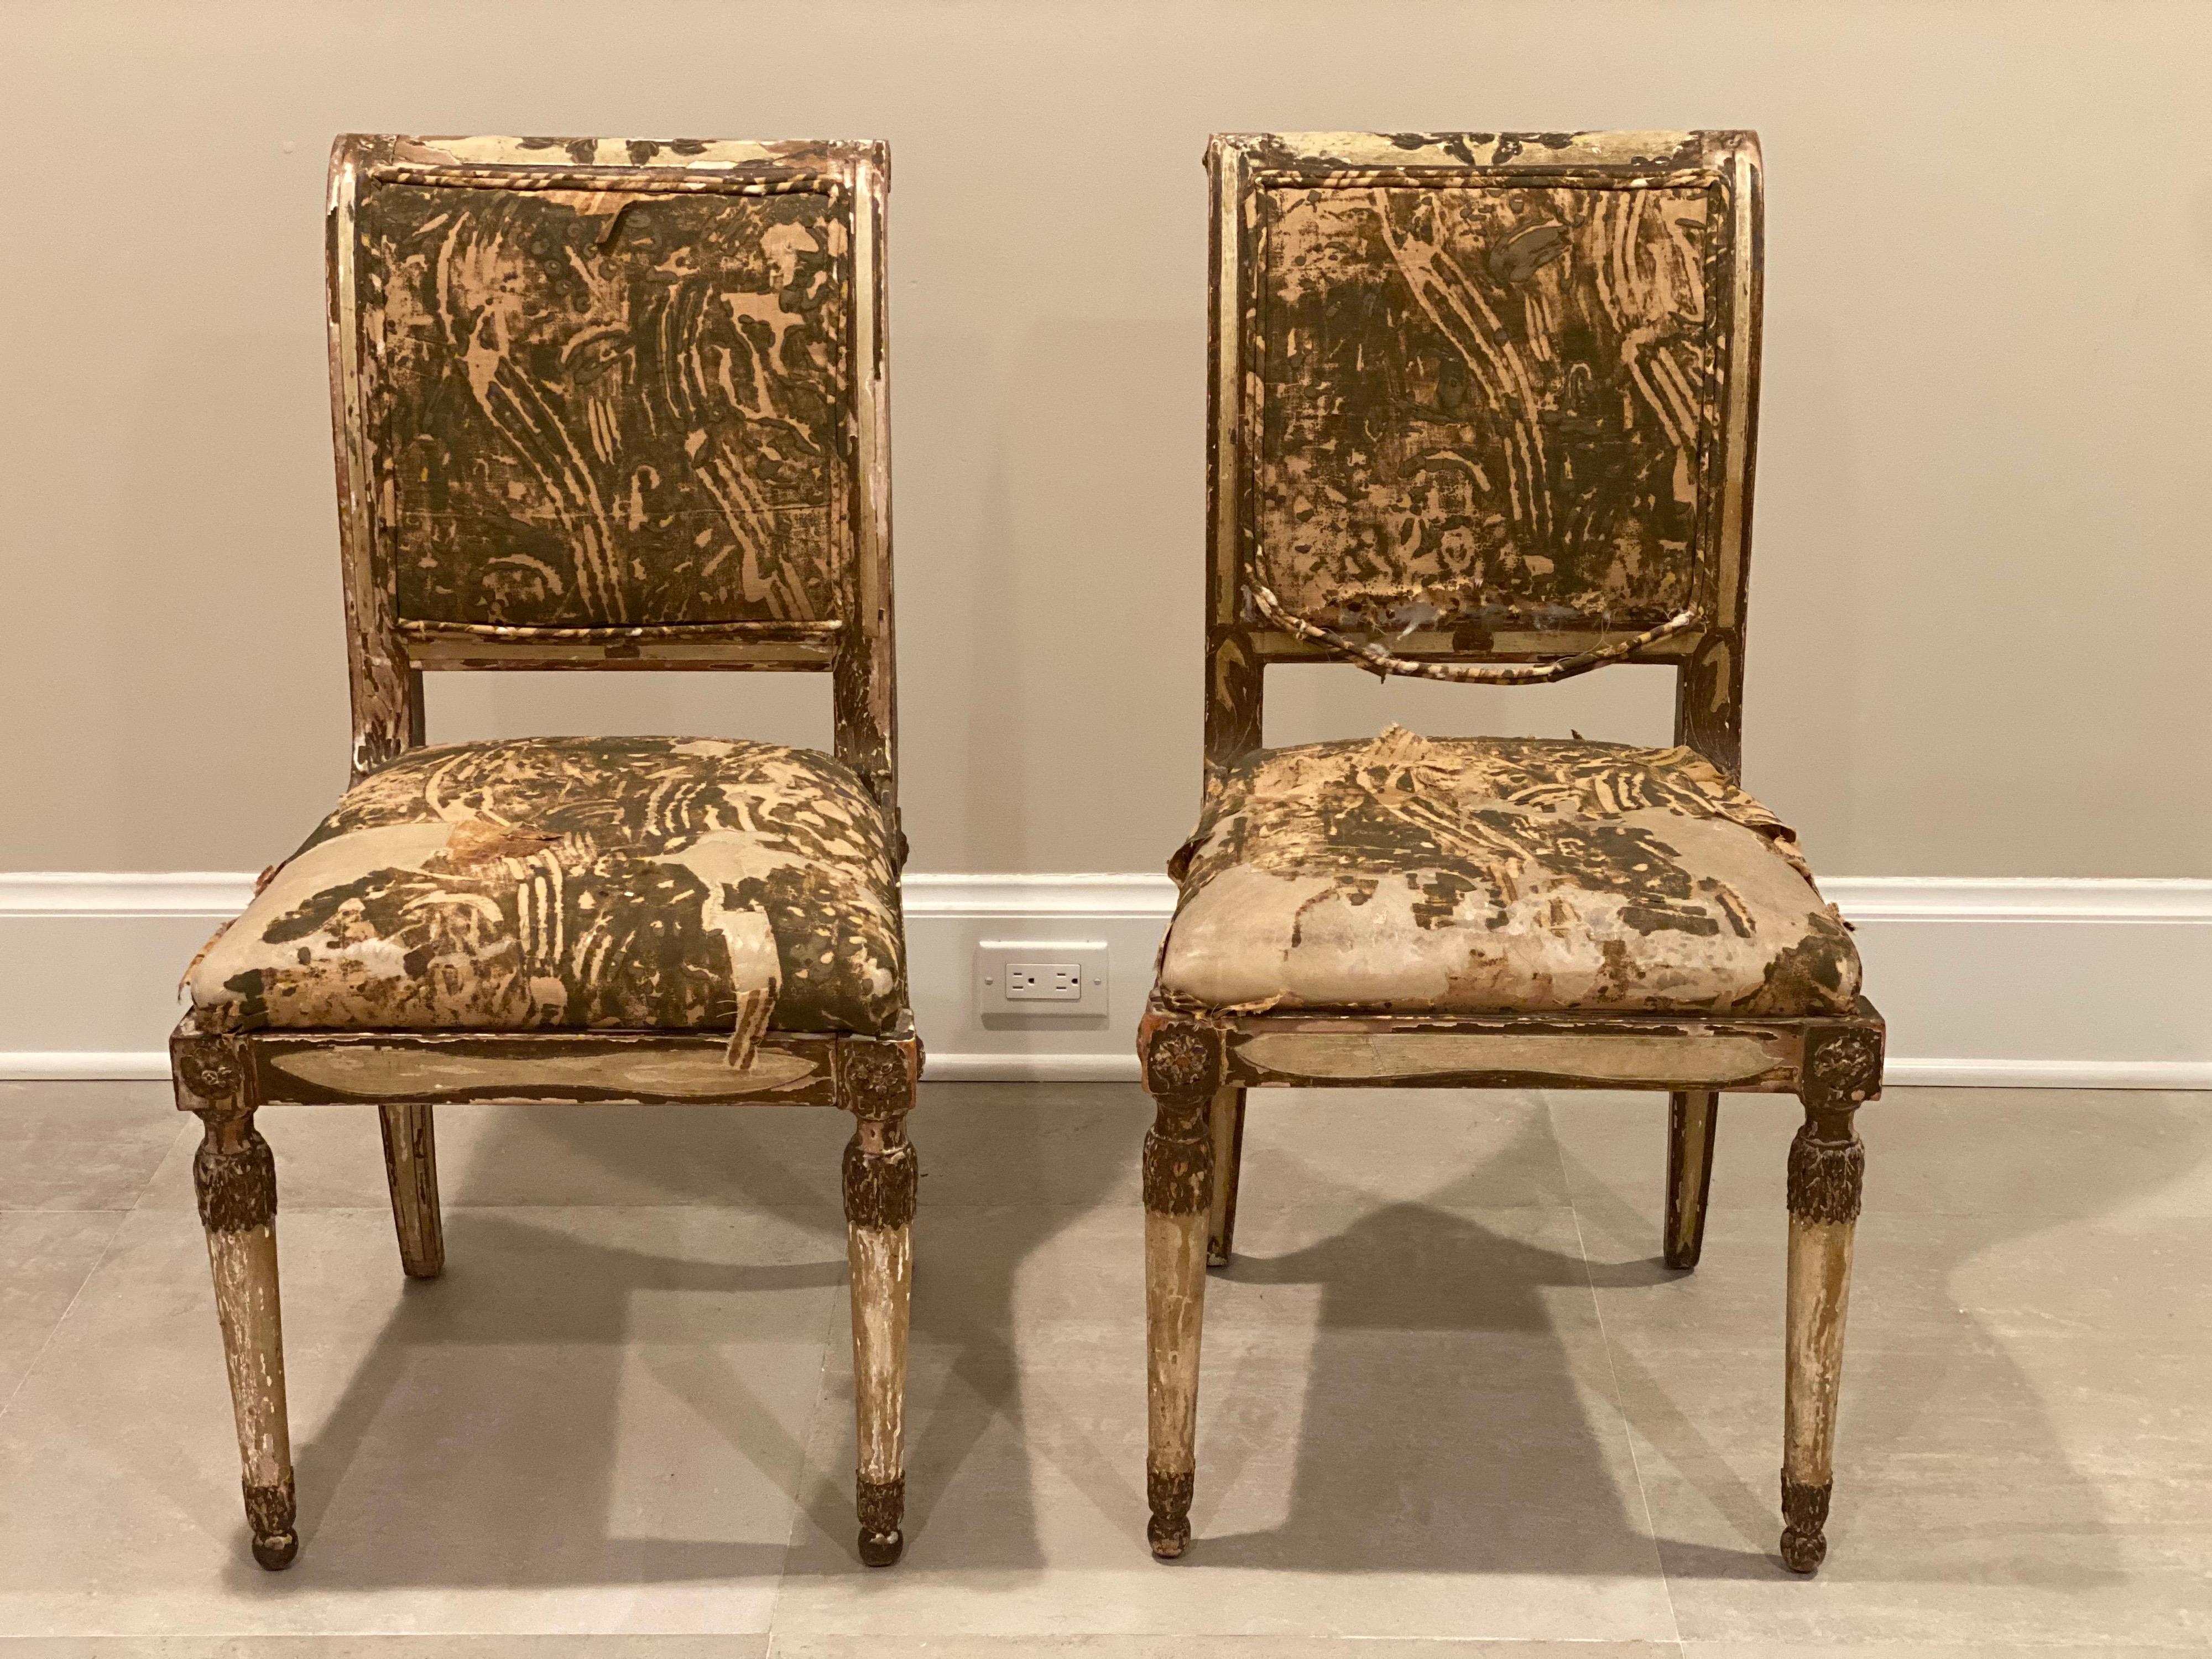 Pair of Italian neoclassical gilt side chairs in painted and gilt finish with remnants of fabric still showing.
The chairs have a lovely scrolled back and splayed back legs. Front legs round and taper. Both chairs are in good stable condition